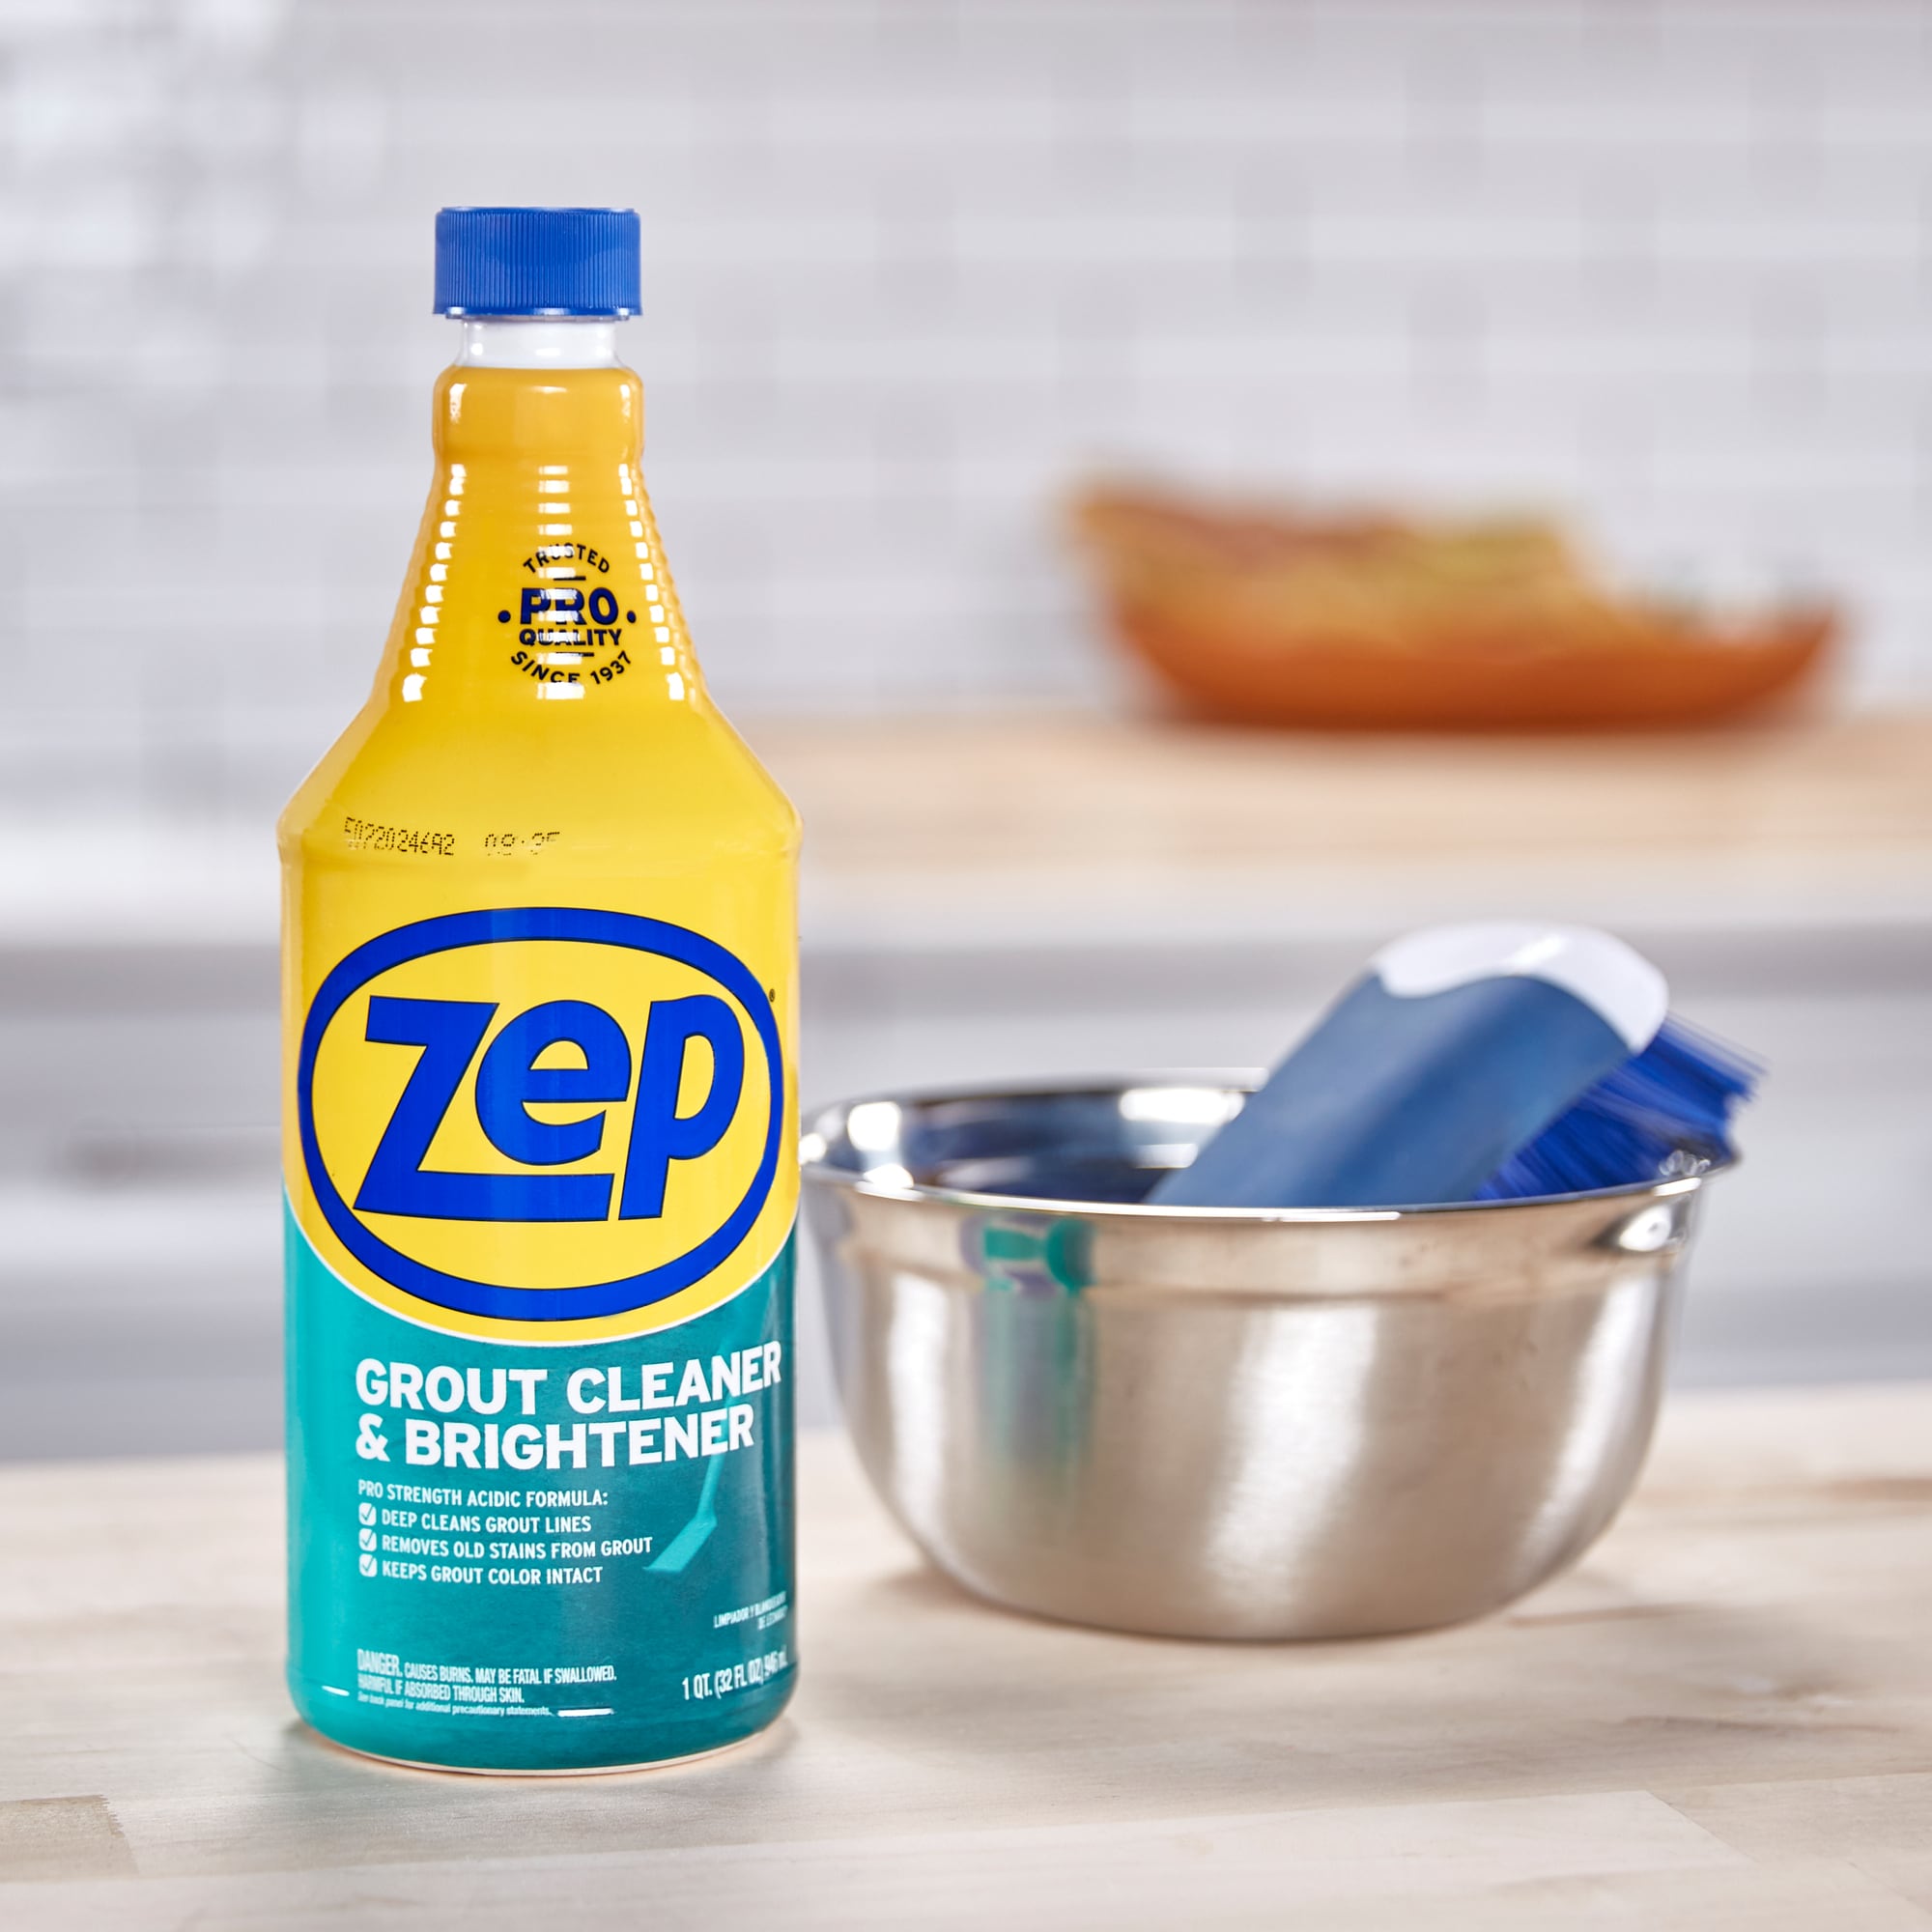 Zep Grout Cleaner and Brightener, 1 qt